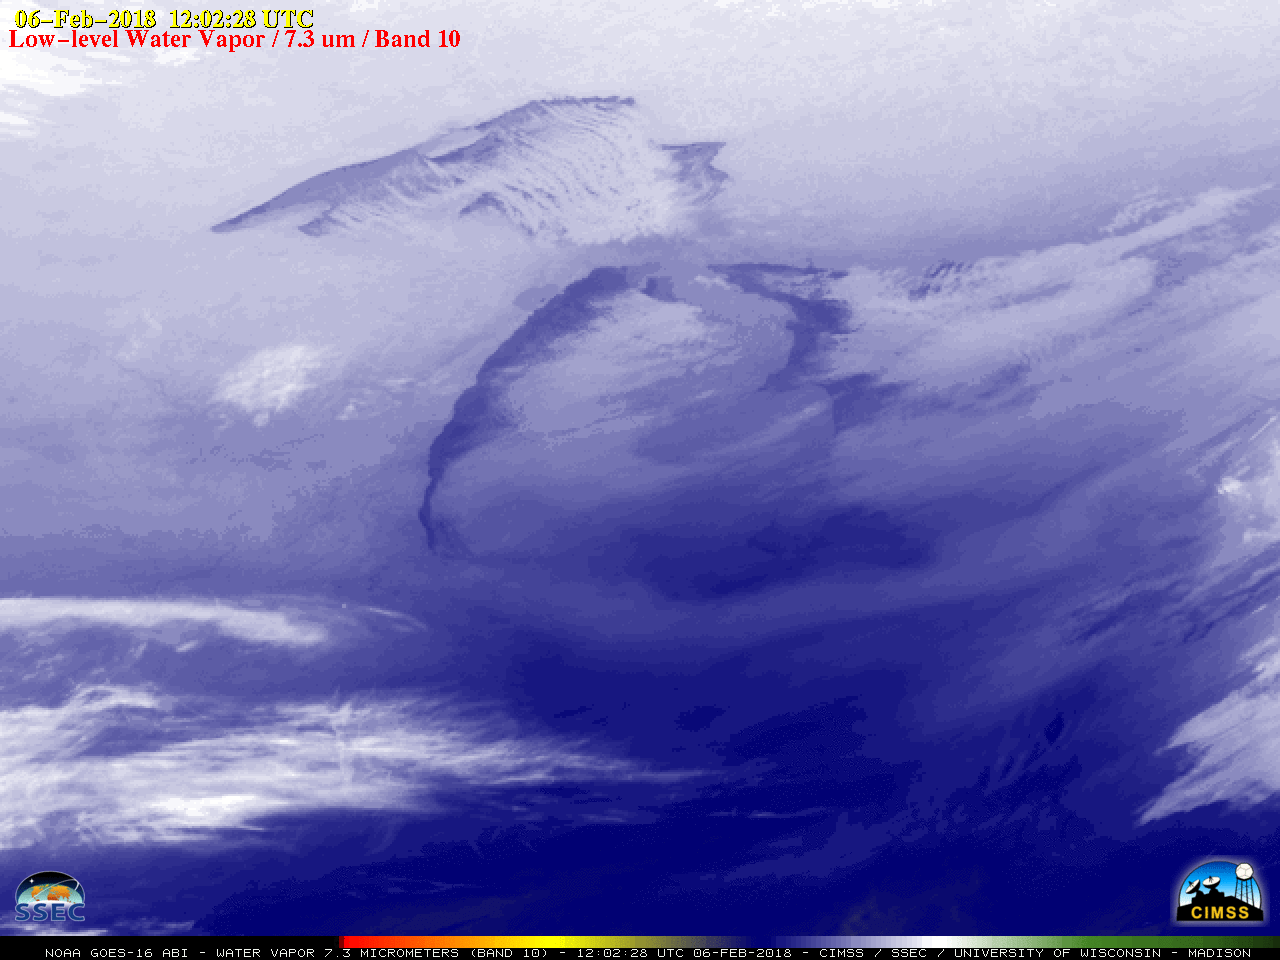 GOES-16 Low-level (7.3 µm) Water Vapor images [click to play animation]